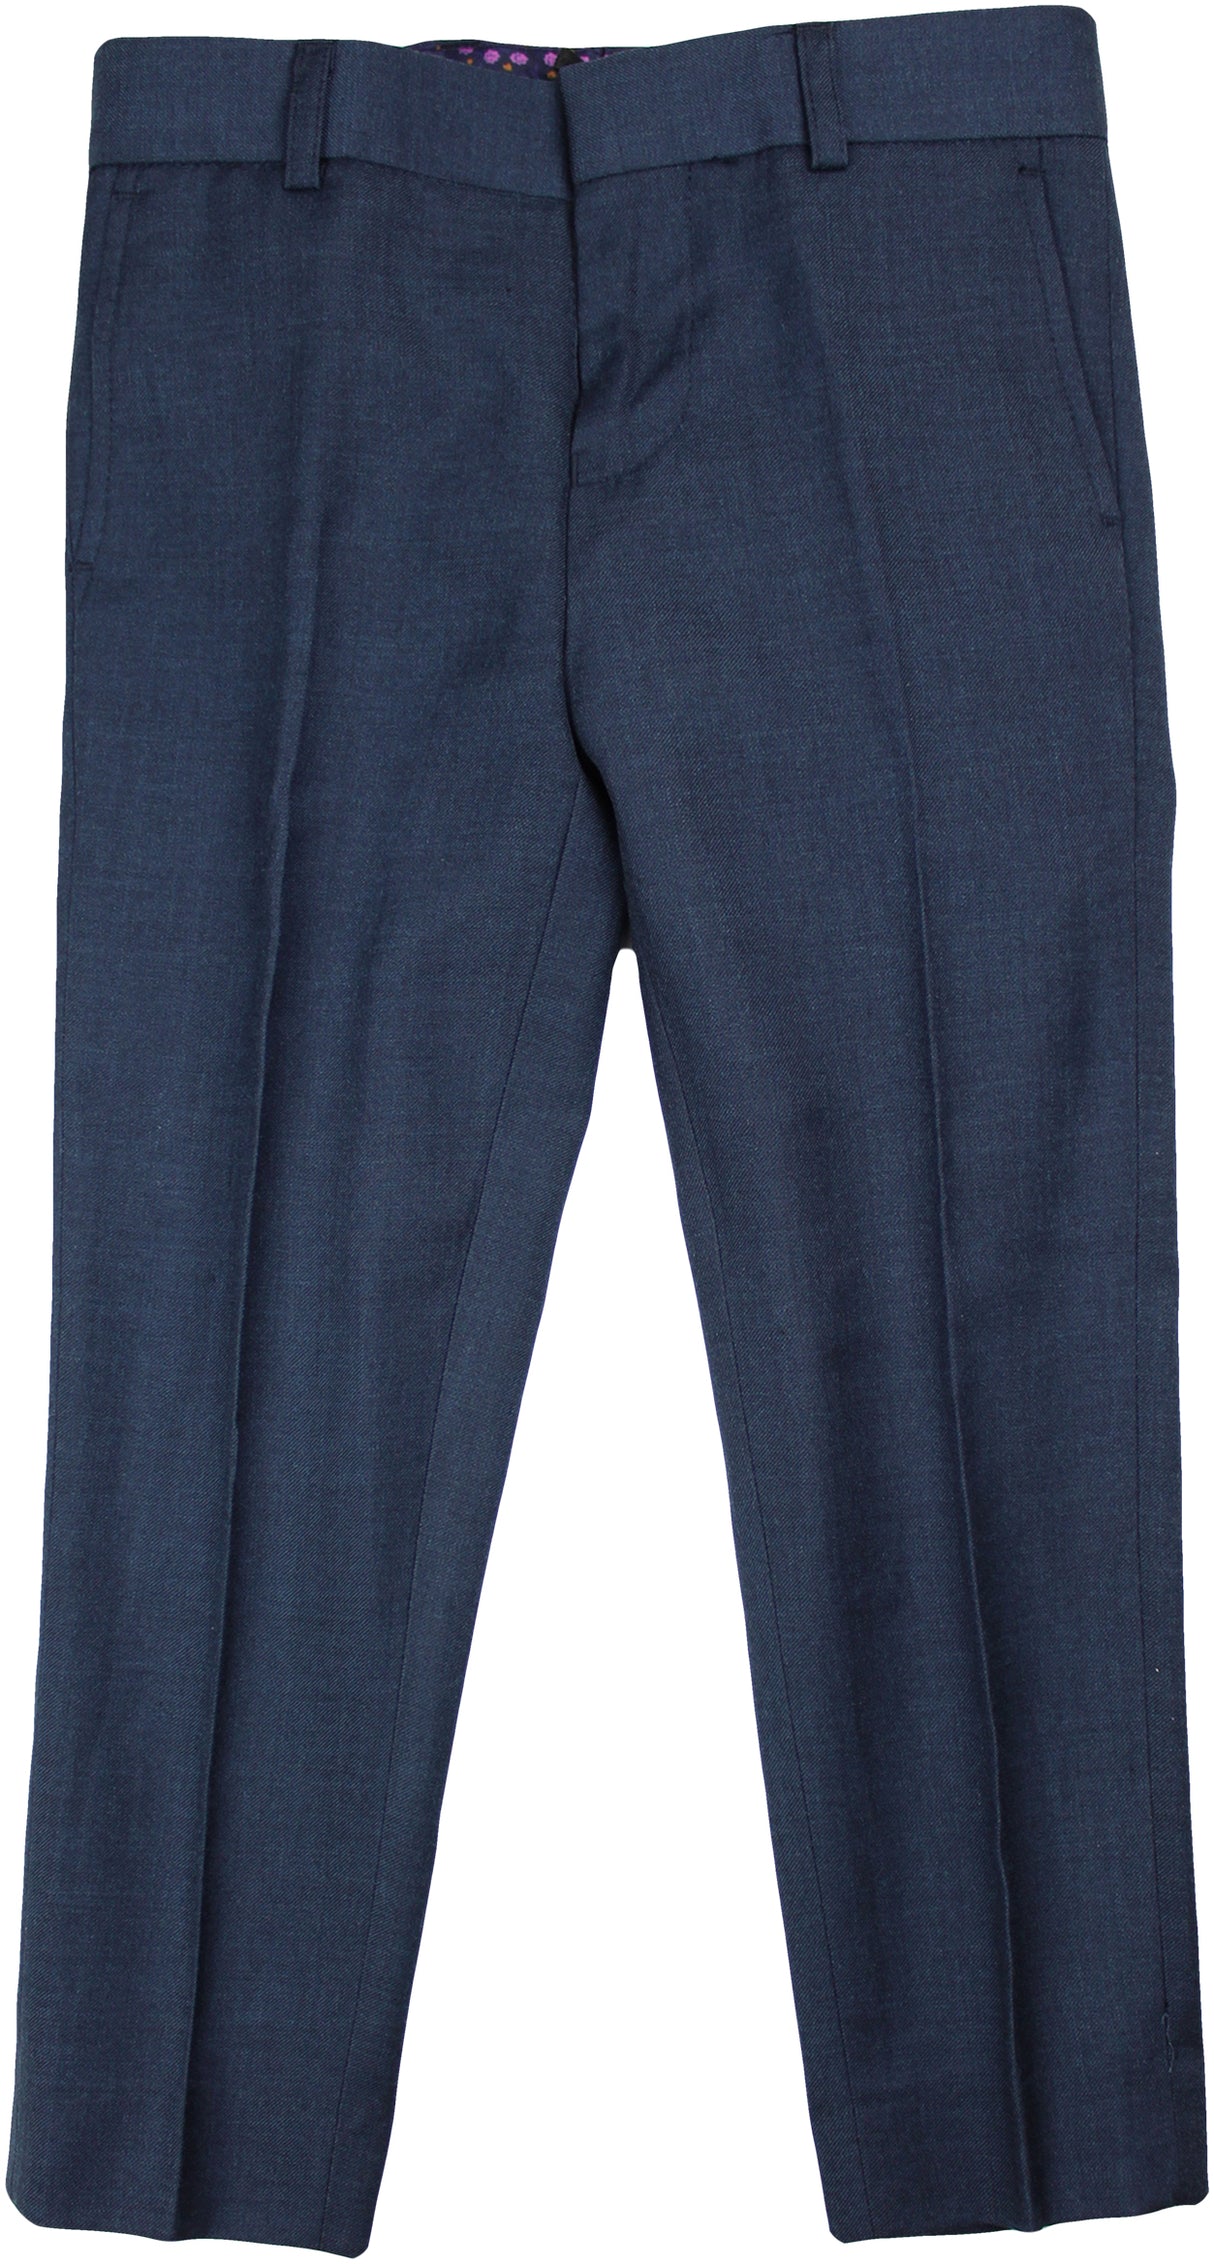 T.O. Collection Boys Blue Suit Separates - 5563-33